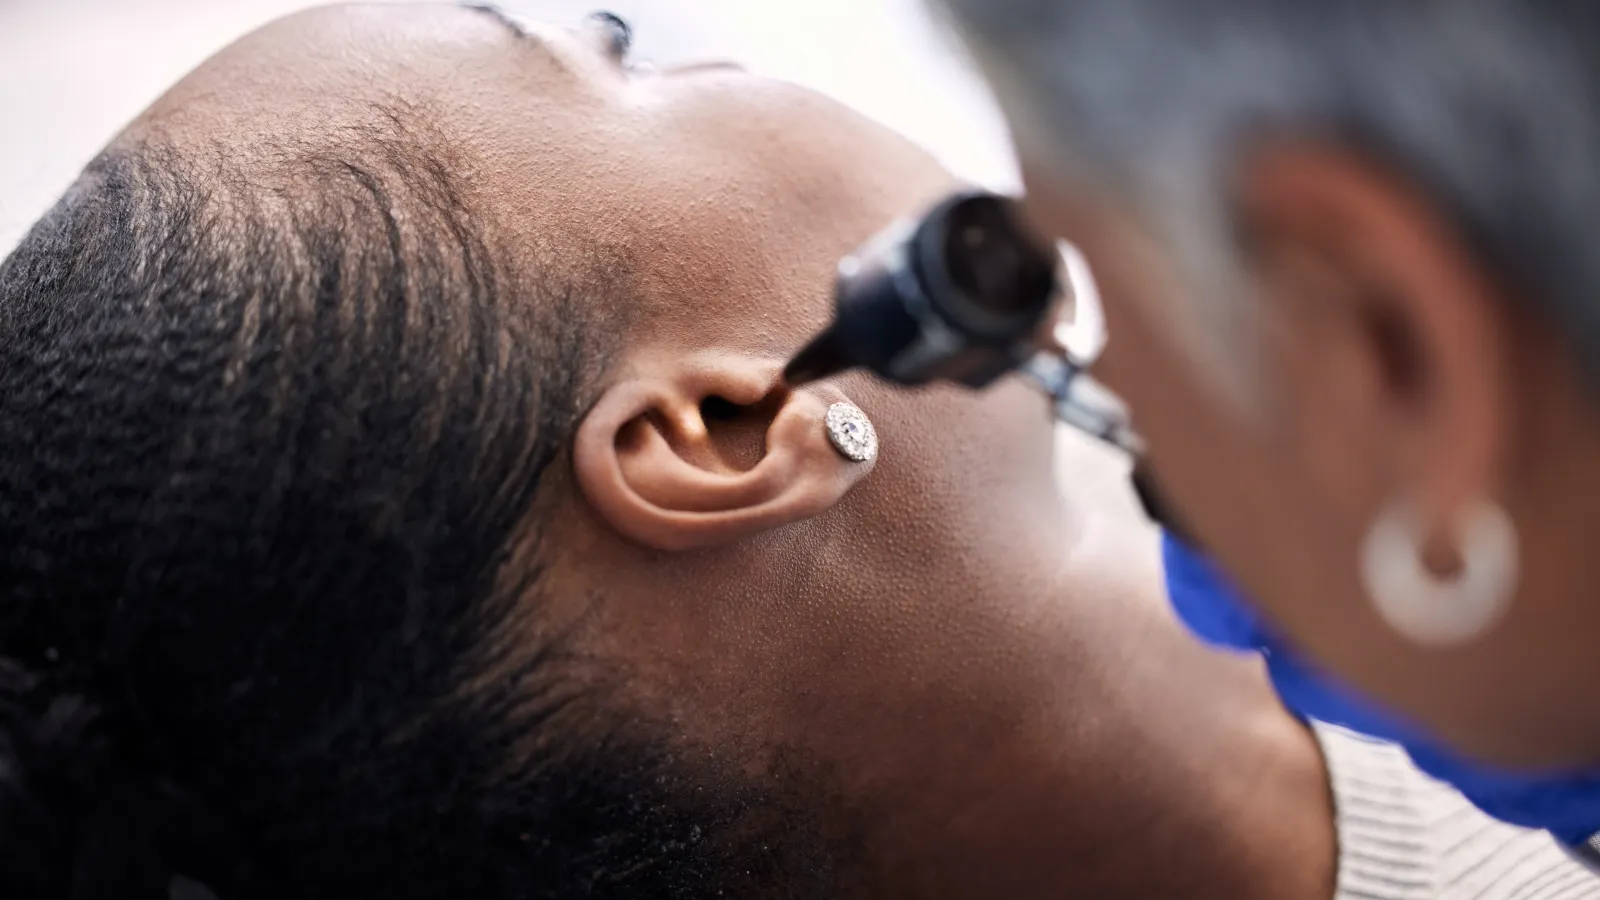 Top 10 Tips To Relieve Ear Pressure